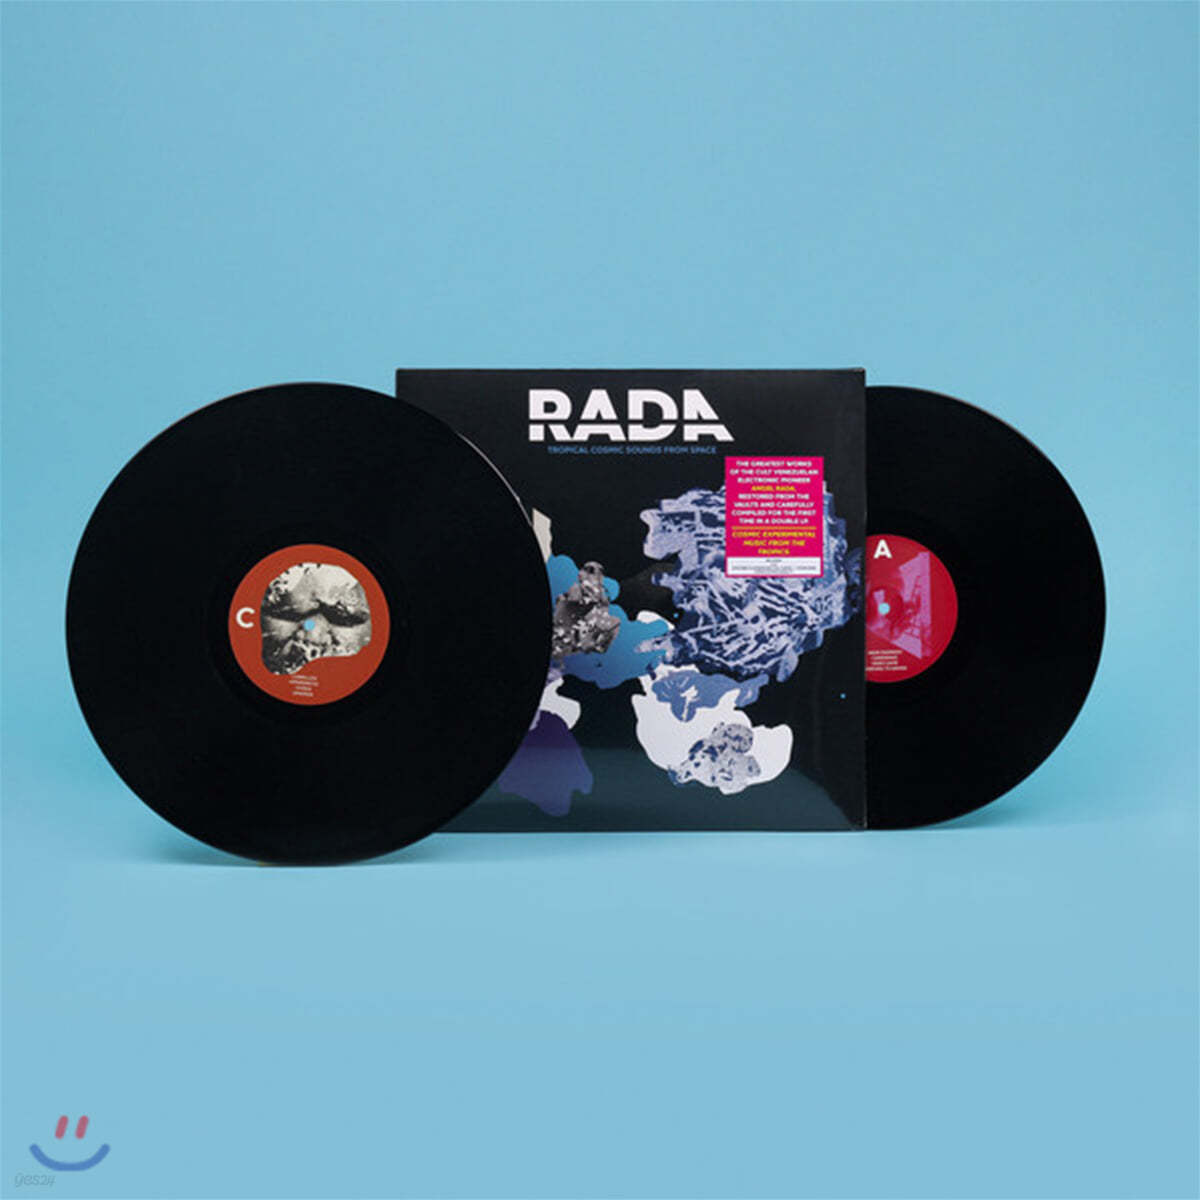 Angel Rada (라다) - Tropical Cosmic Sounds From Space [2LP]